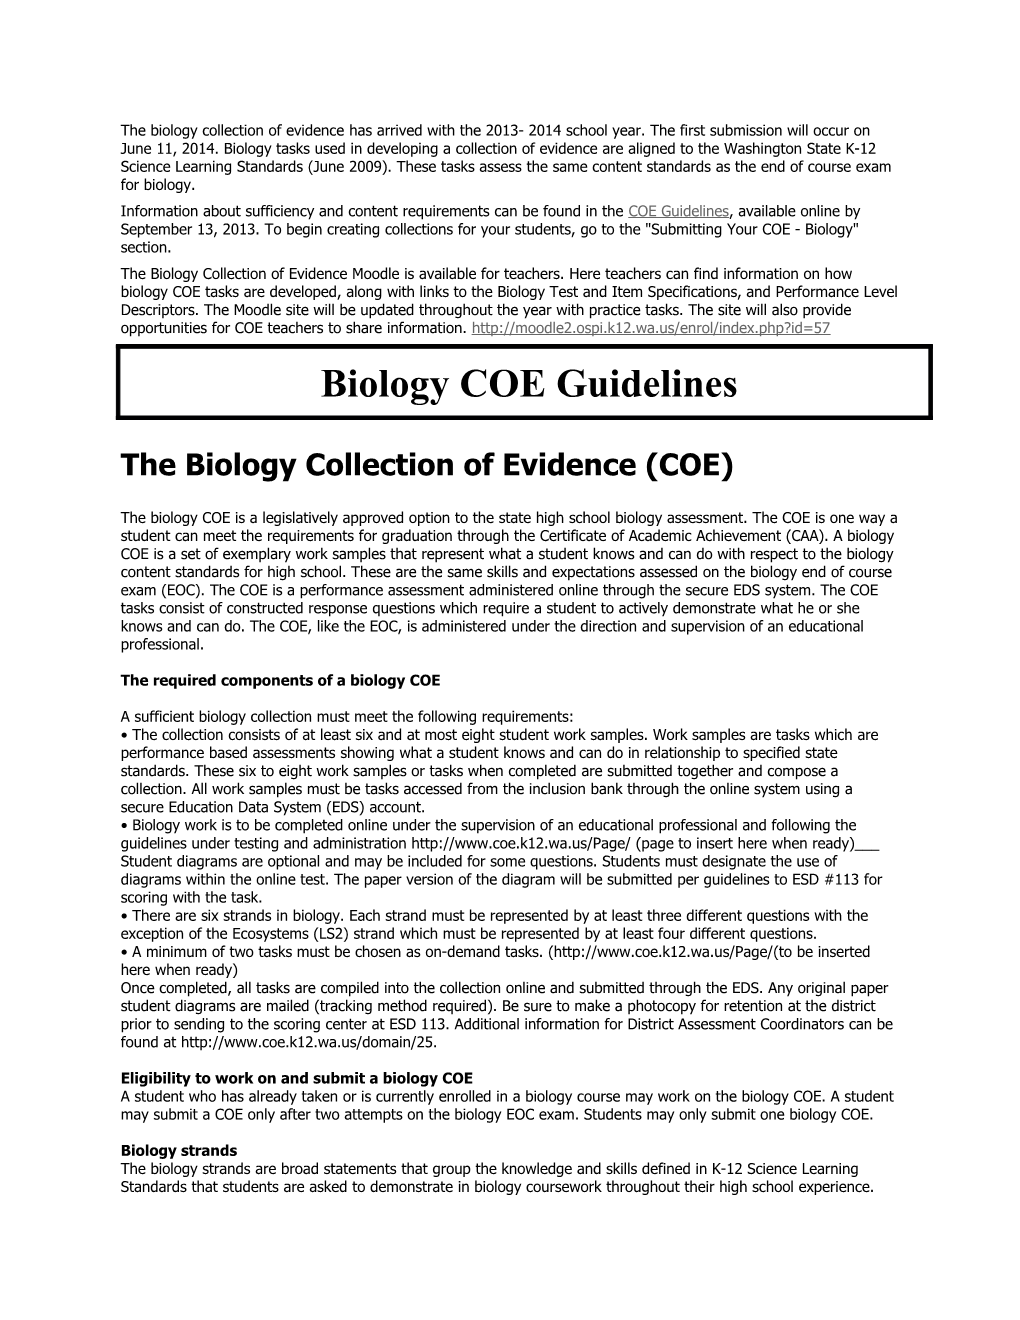 The Biology Collection of Evidence (COE)